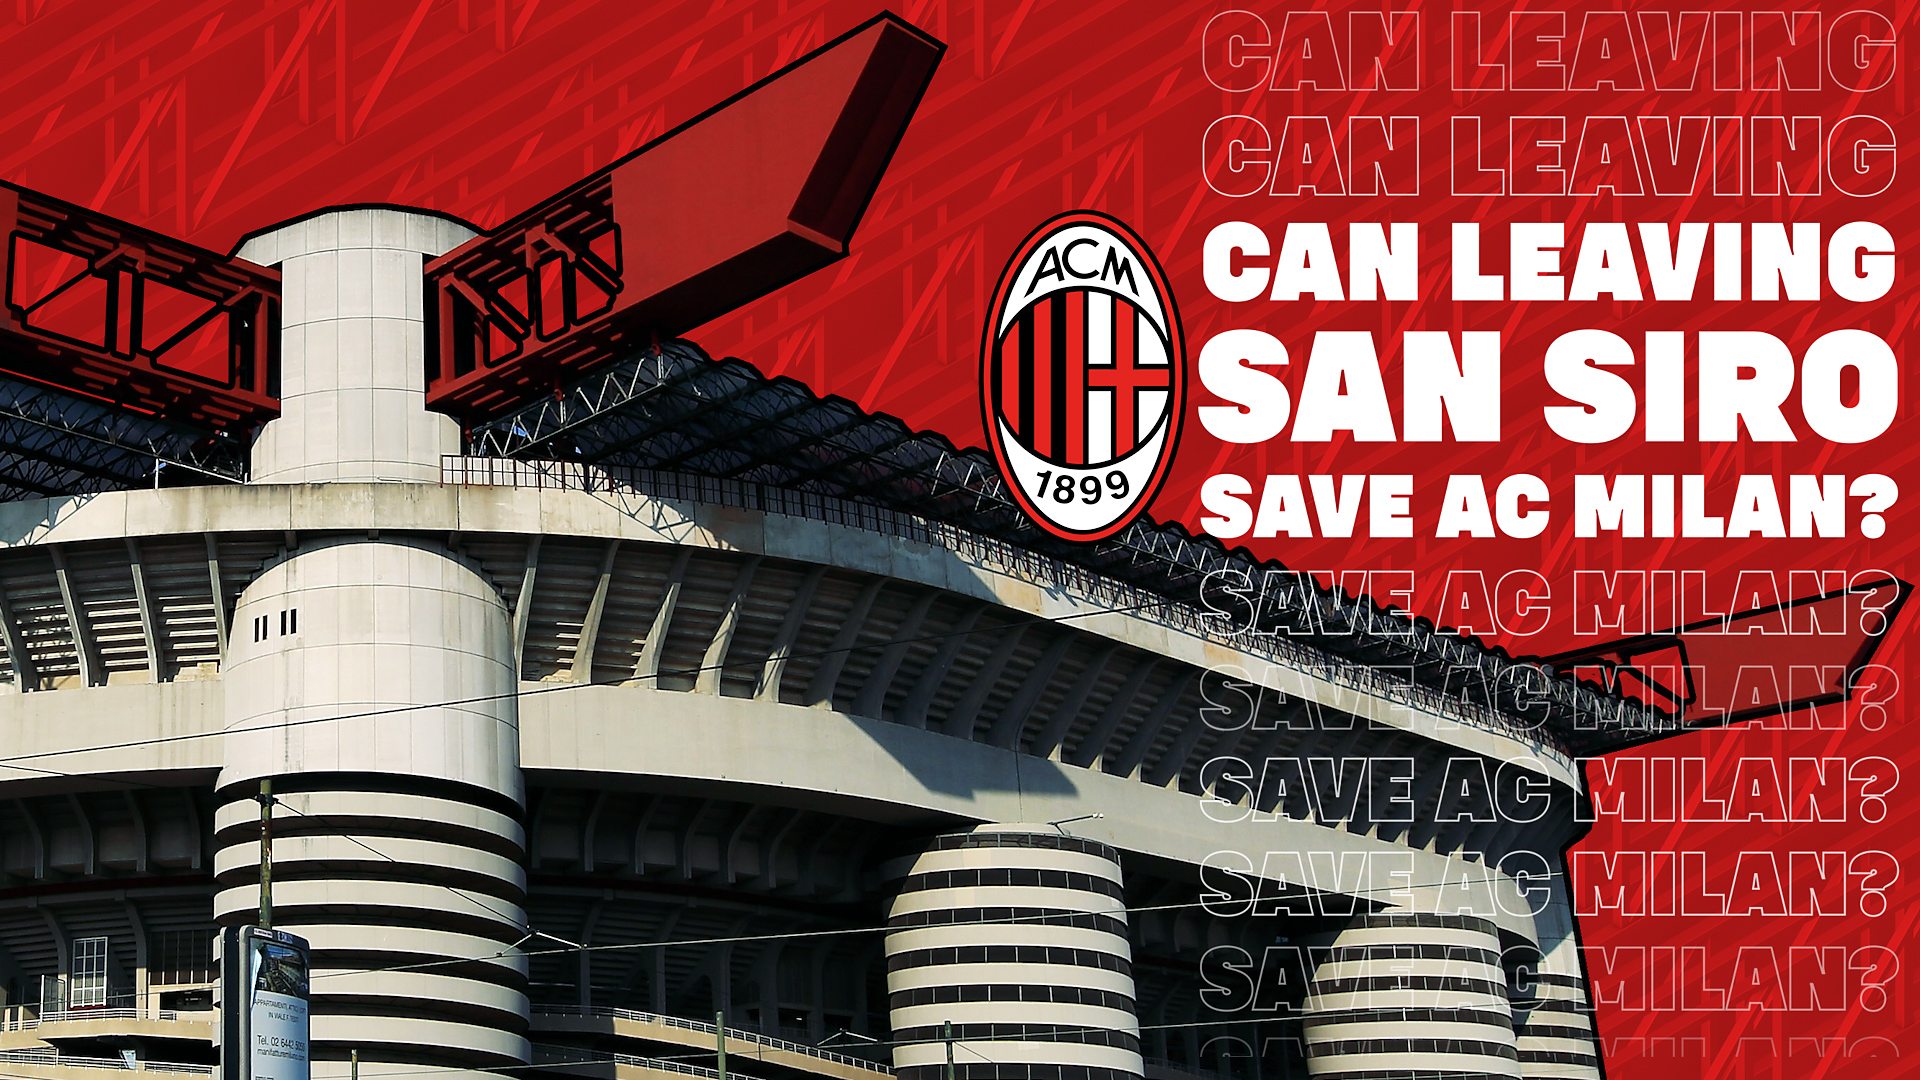 AC Milan: Could leaving San Siro for a new stadium return the Rossoneri to greatness? - BBC Sport